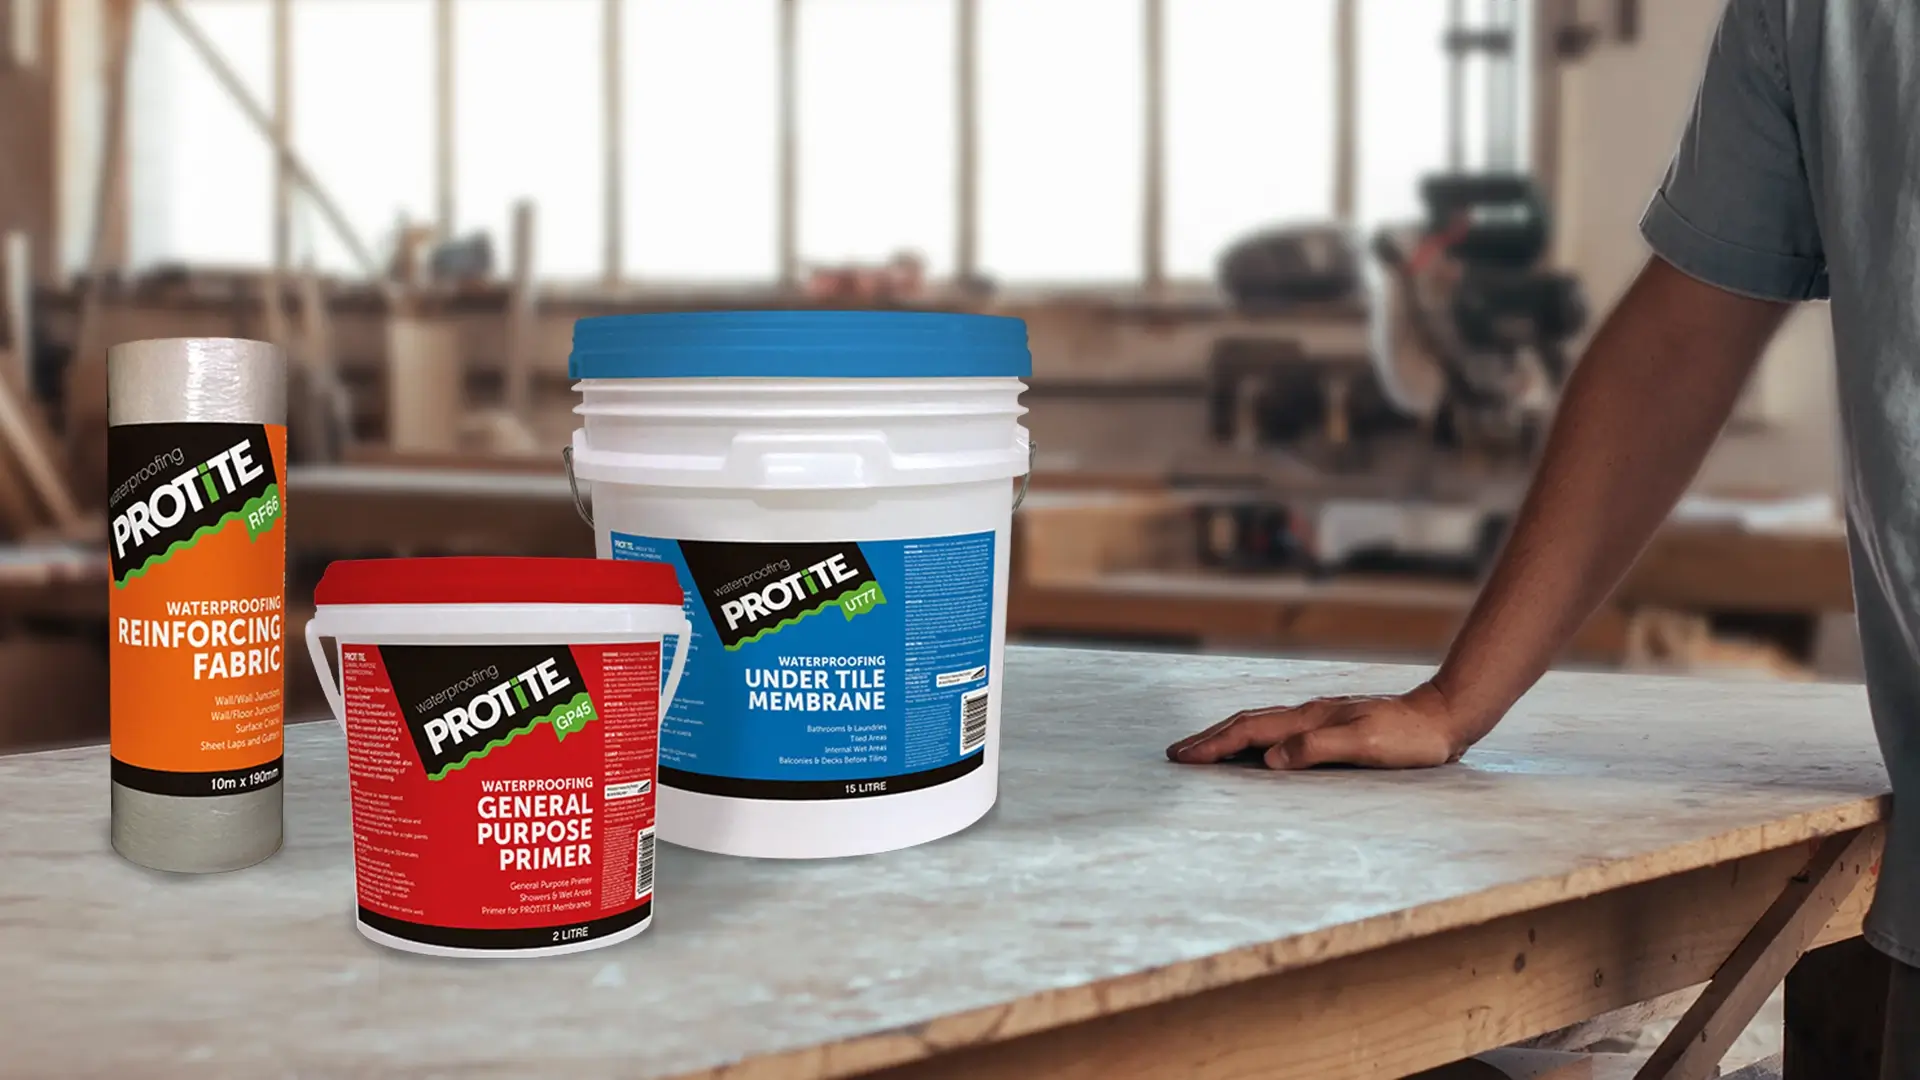 Protite Waterproofing ranges, fabric roll and tubs.